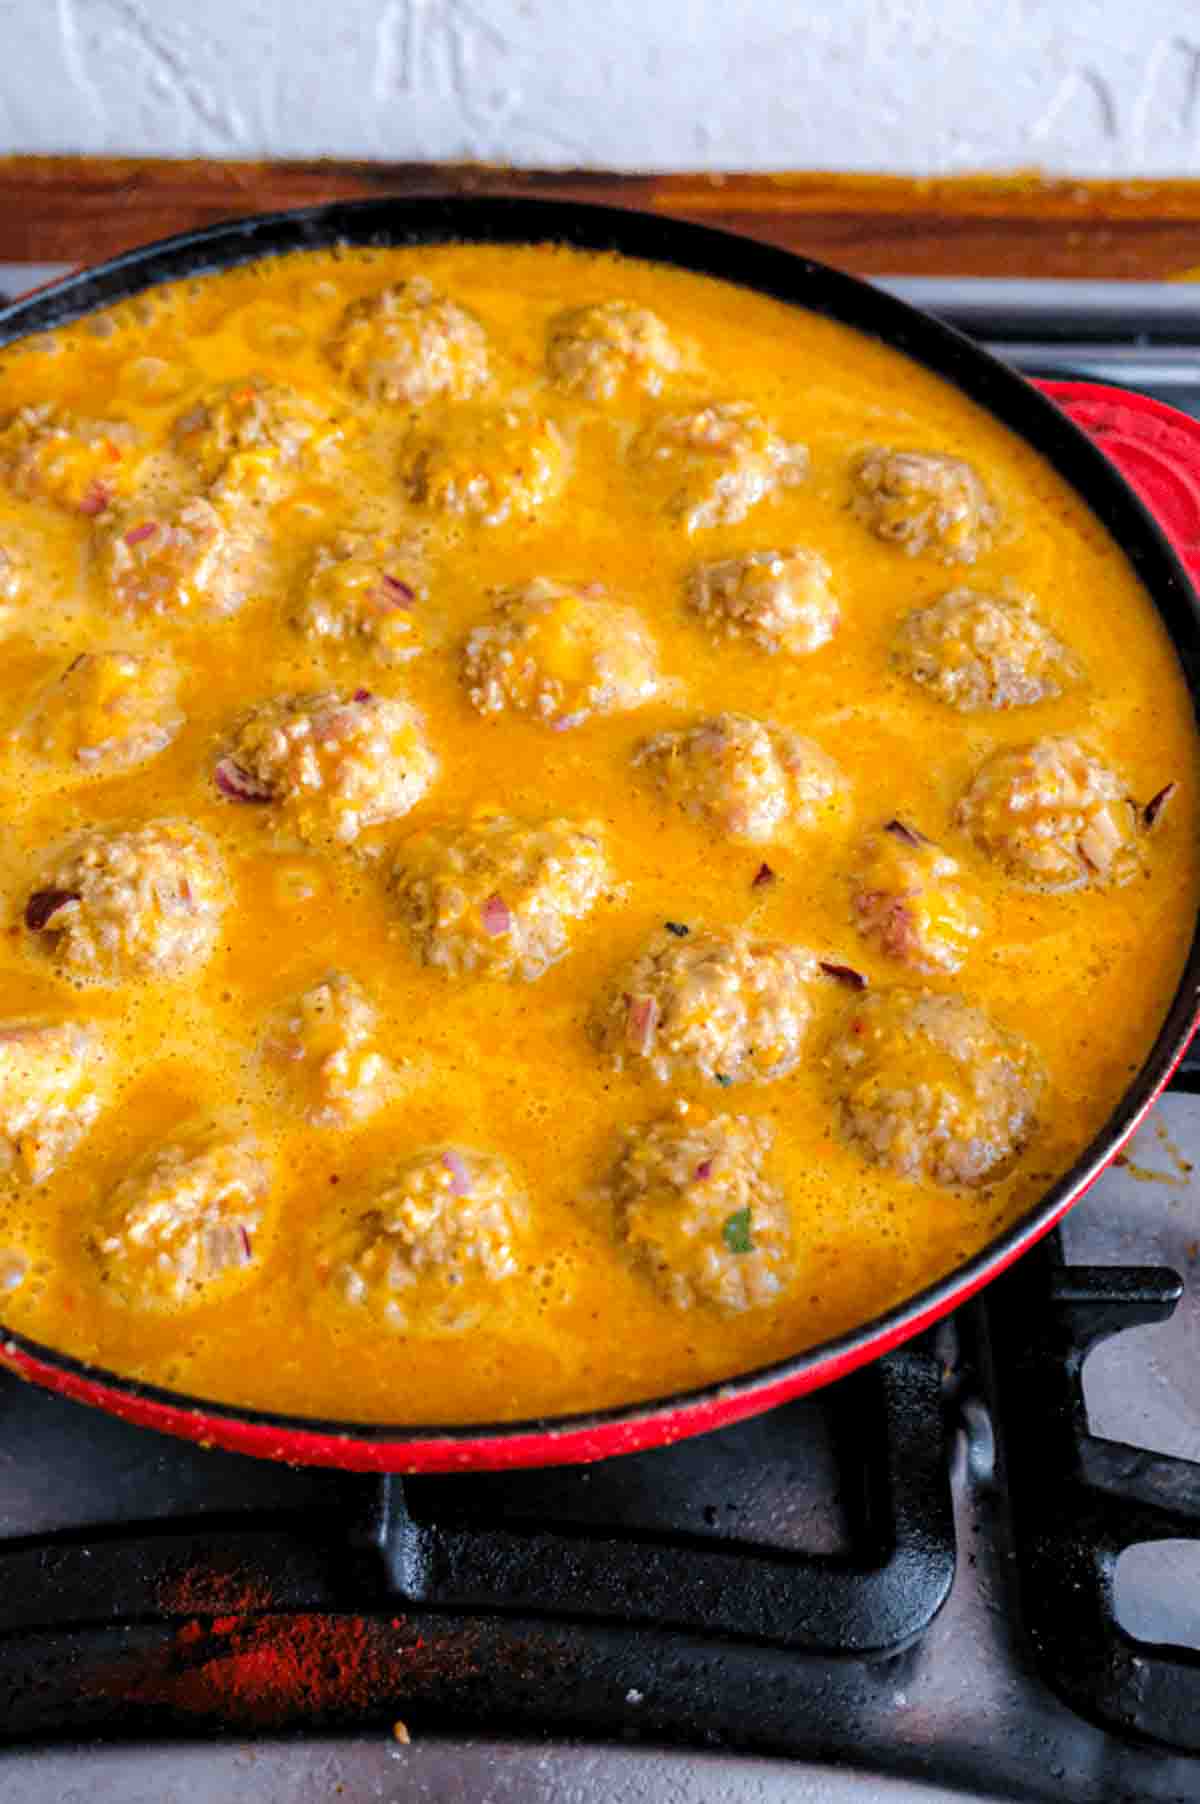 The now cooked meatballs simmering in a skillet in an orange curry sauce.